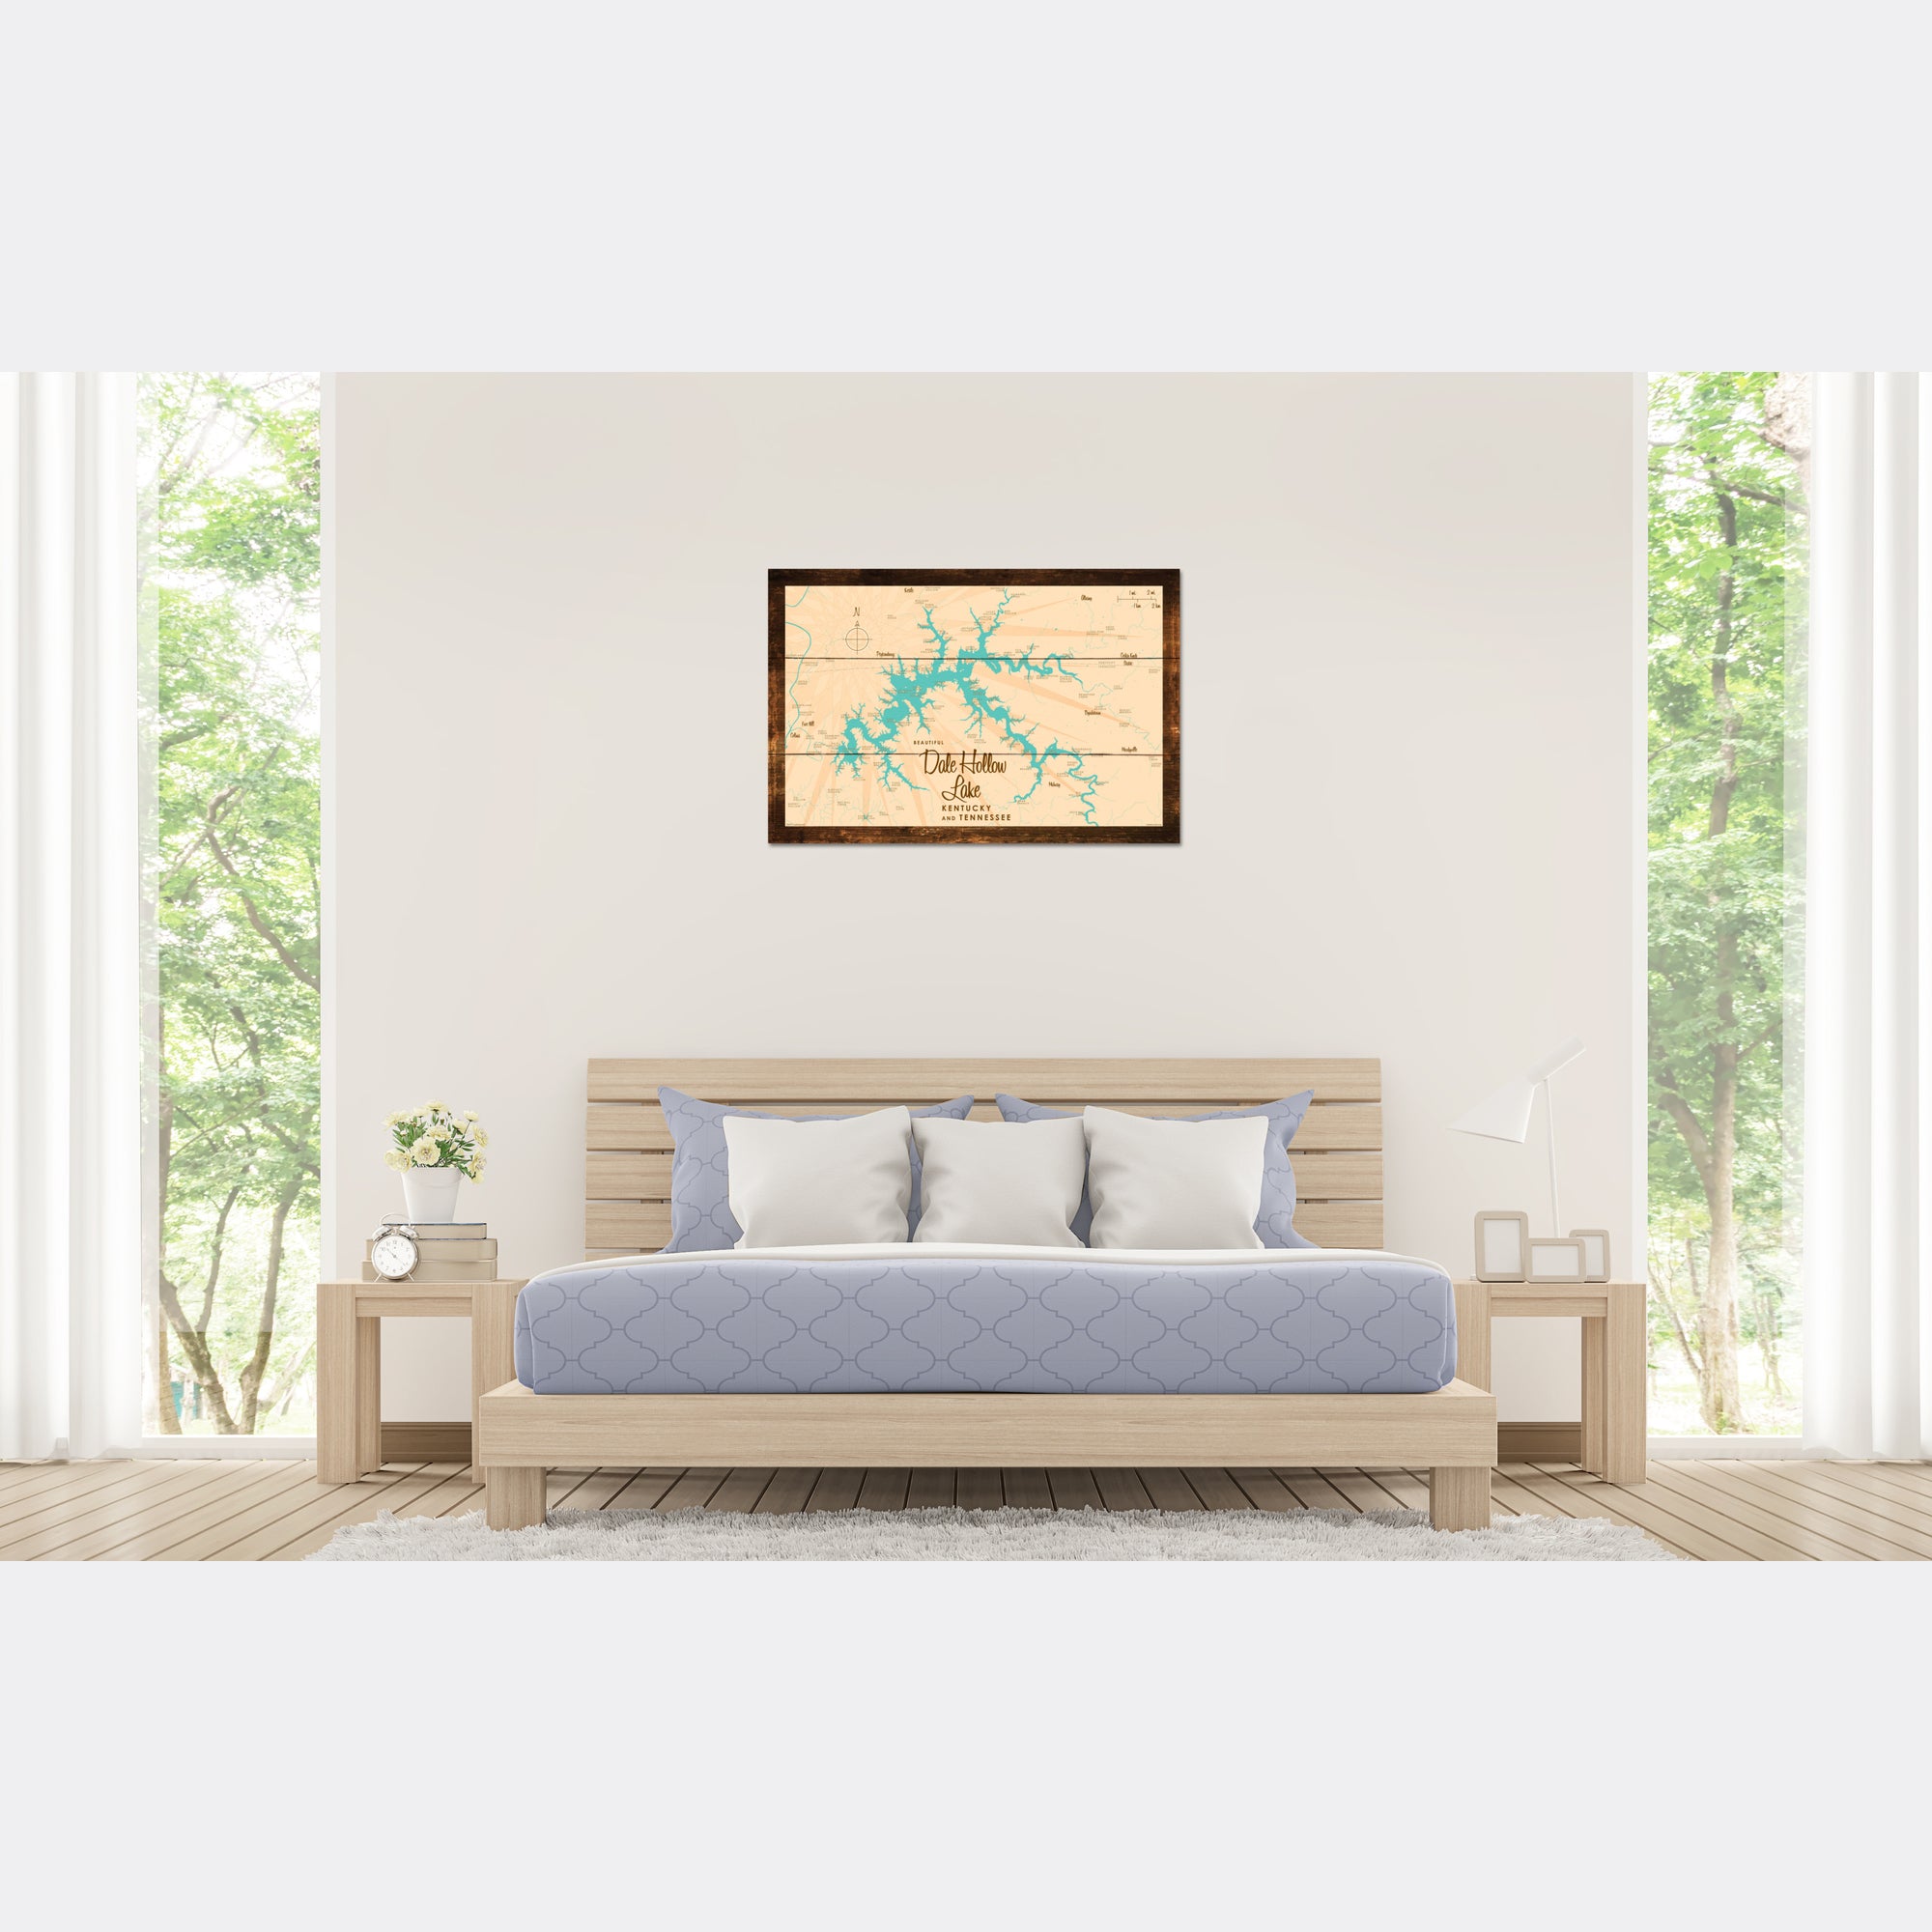 Dale Hollow Lake, Kentucky & Tennessee, Rustic Wood Sign Map Art